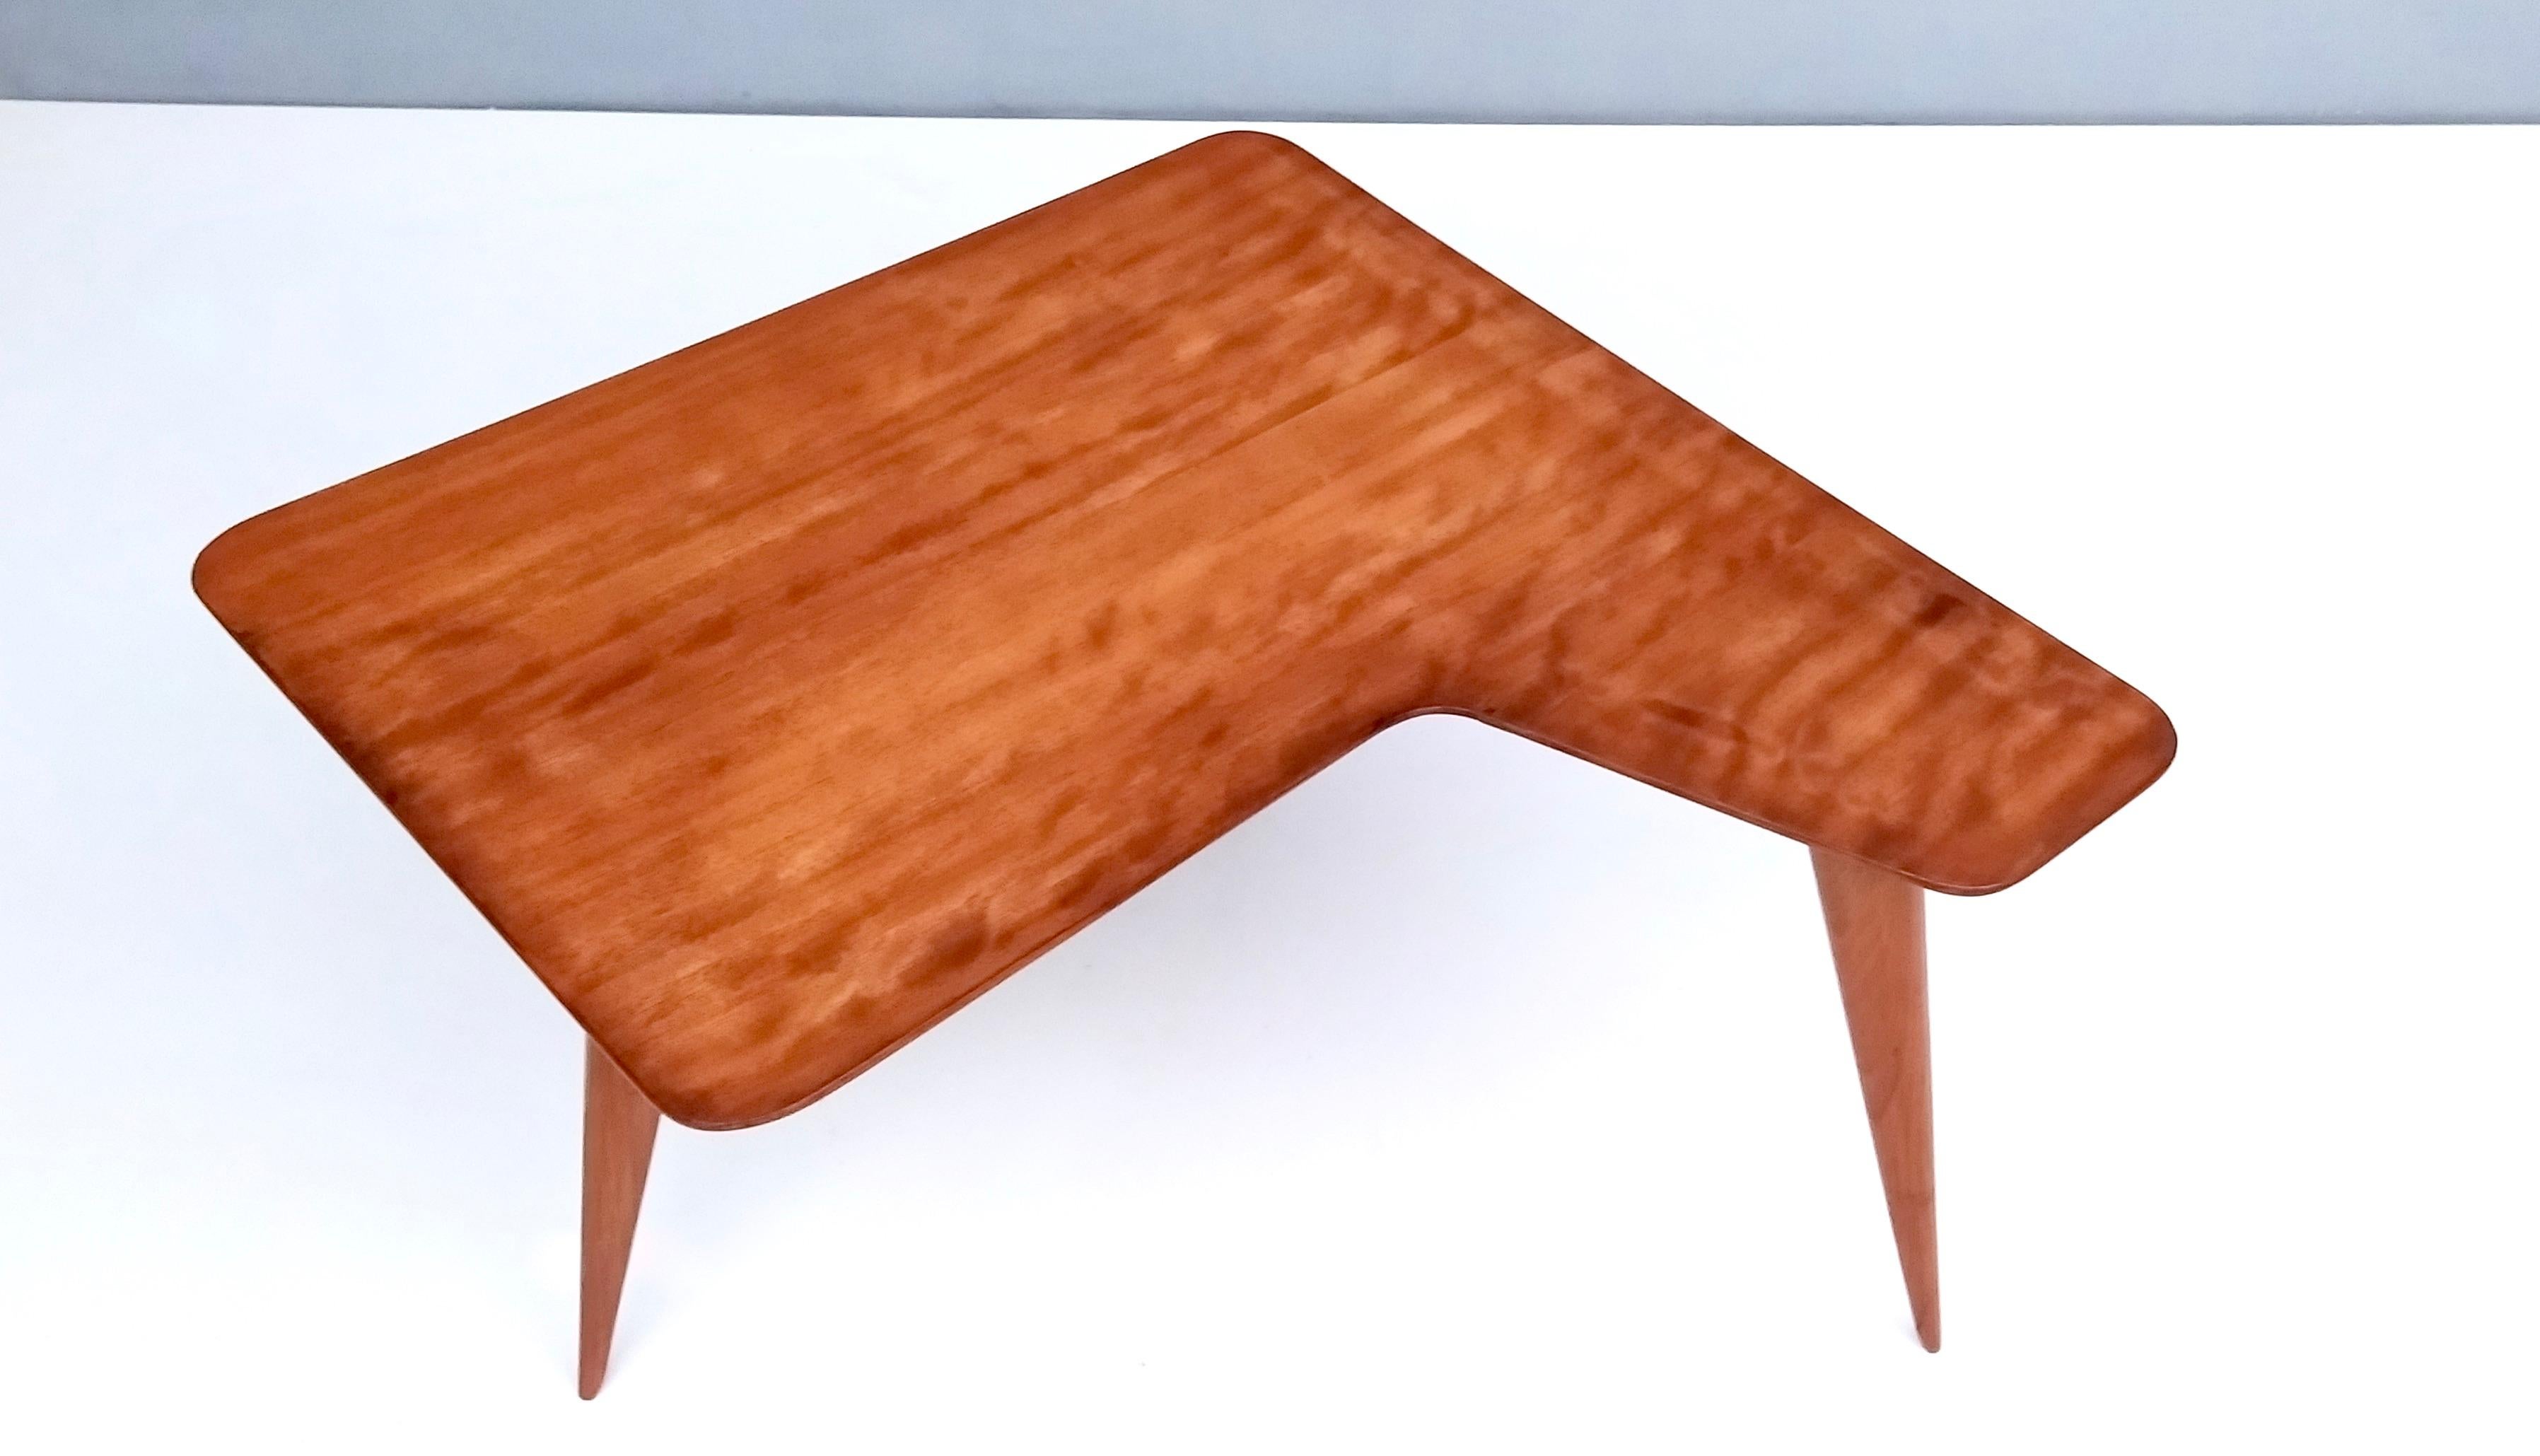 Vintage Irregular Shaped Wood Veneer Coffee Table Ascribable to Gio Ponti, Italy In Excellent Condition For Sale In Bresso, Lombardy